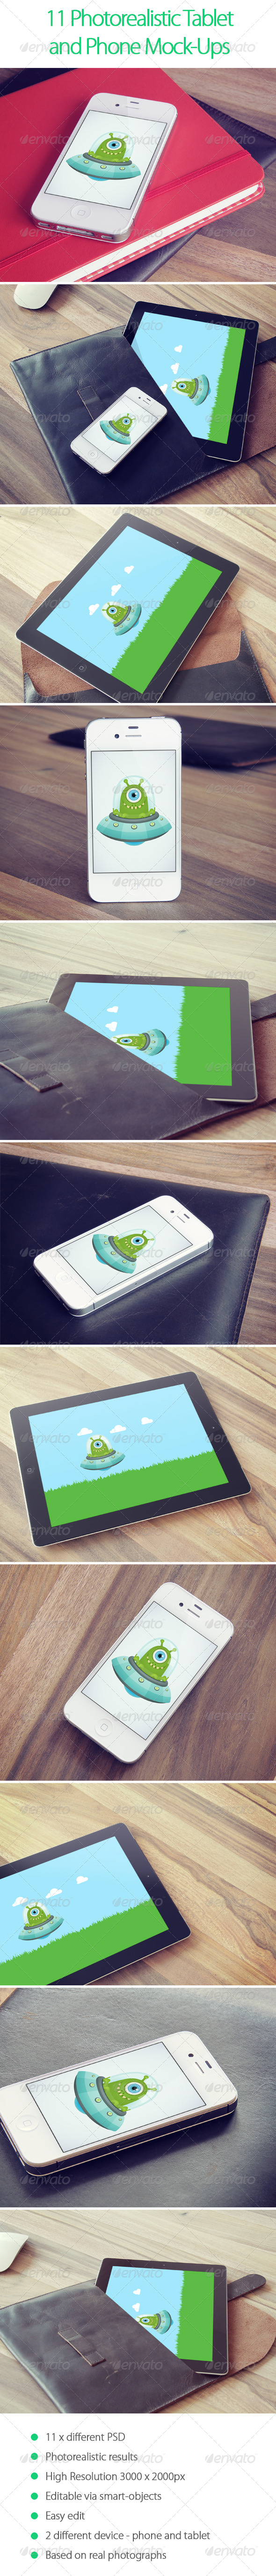 11 Photorealistic Tablet and Phone Mock-Ups